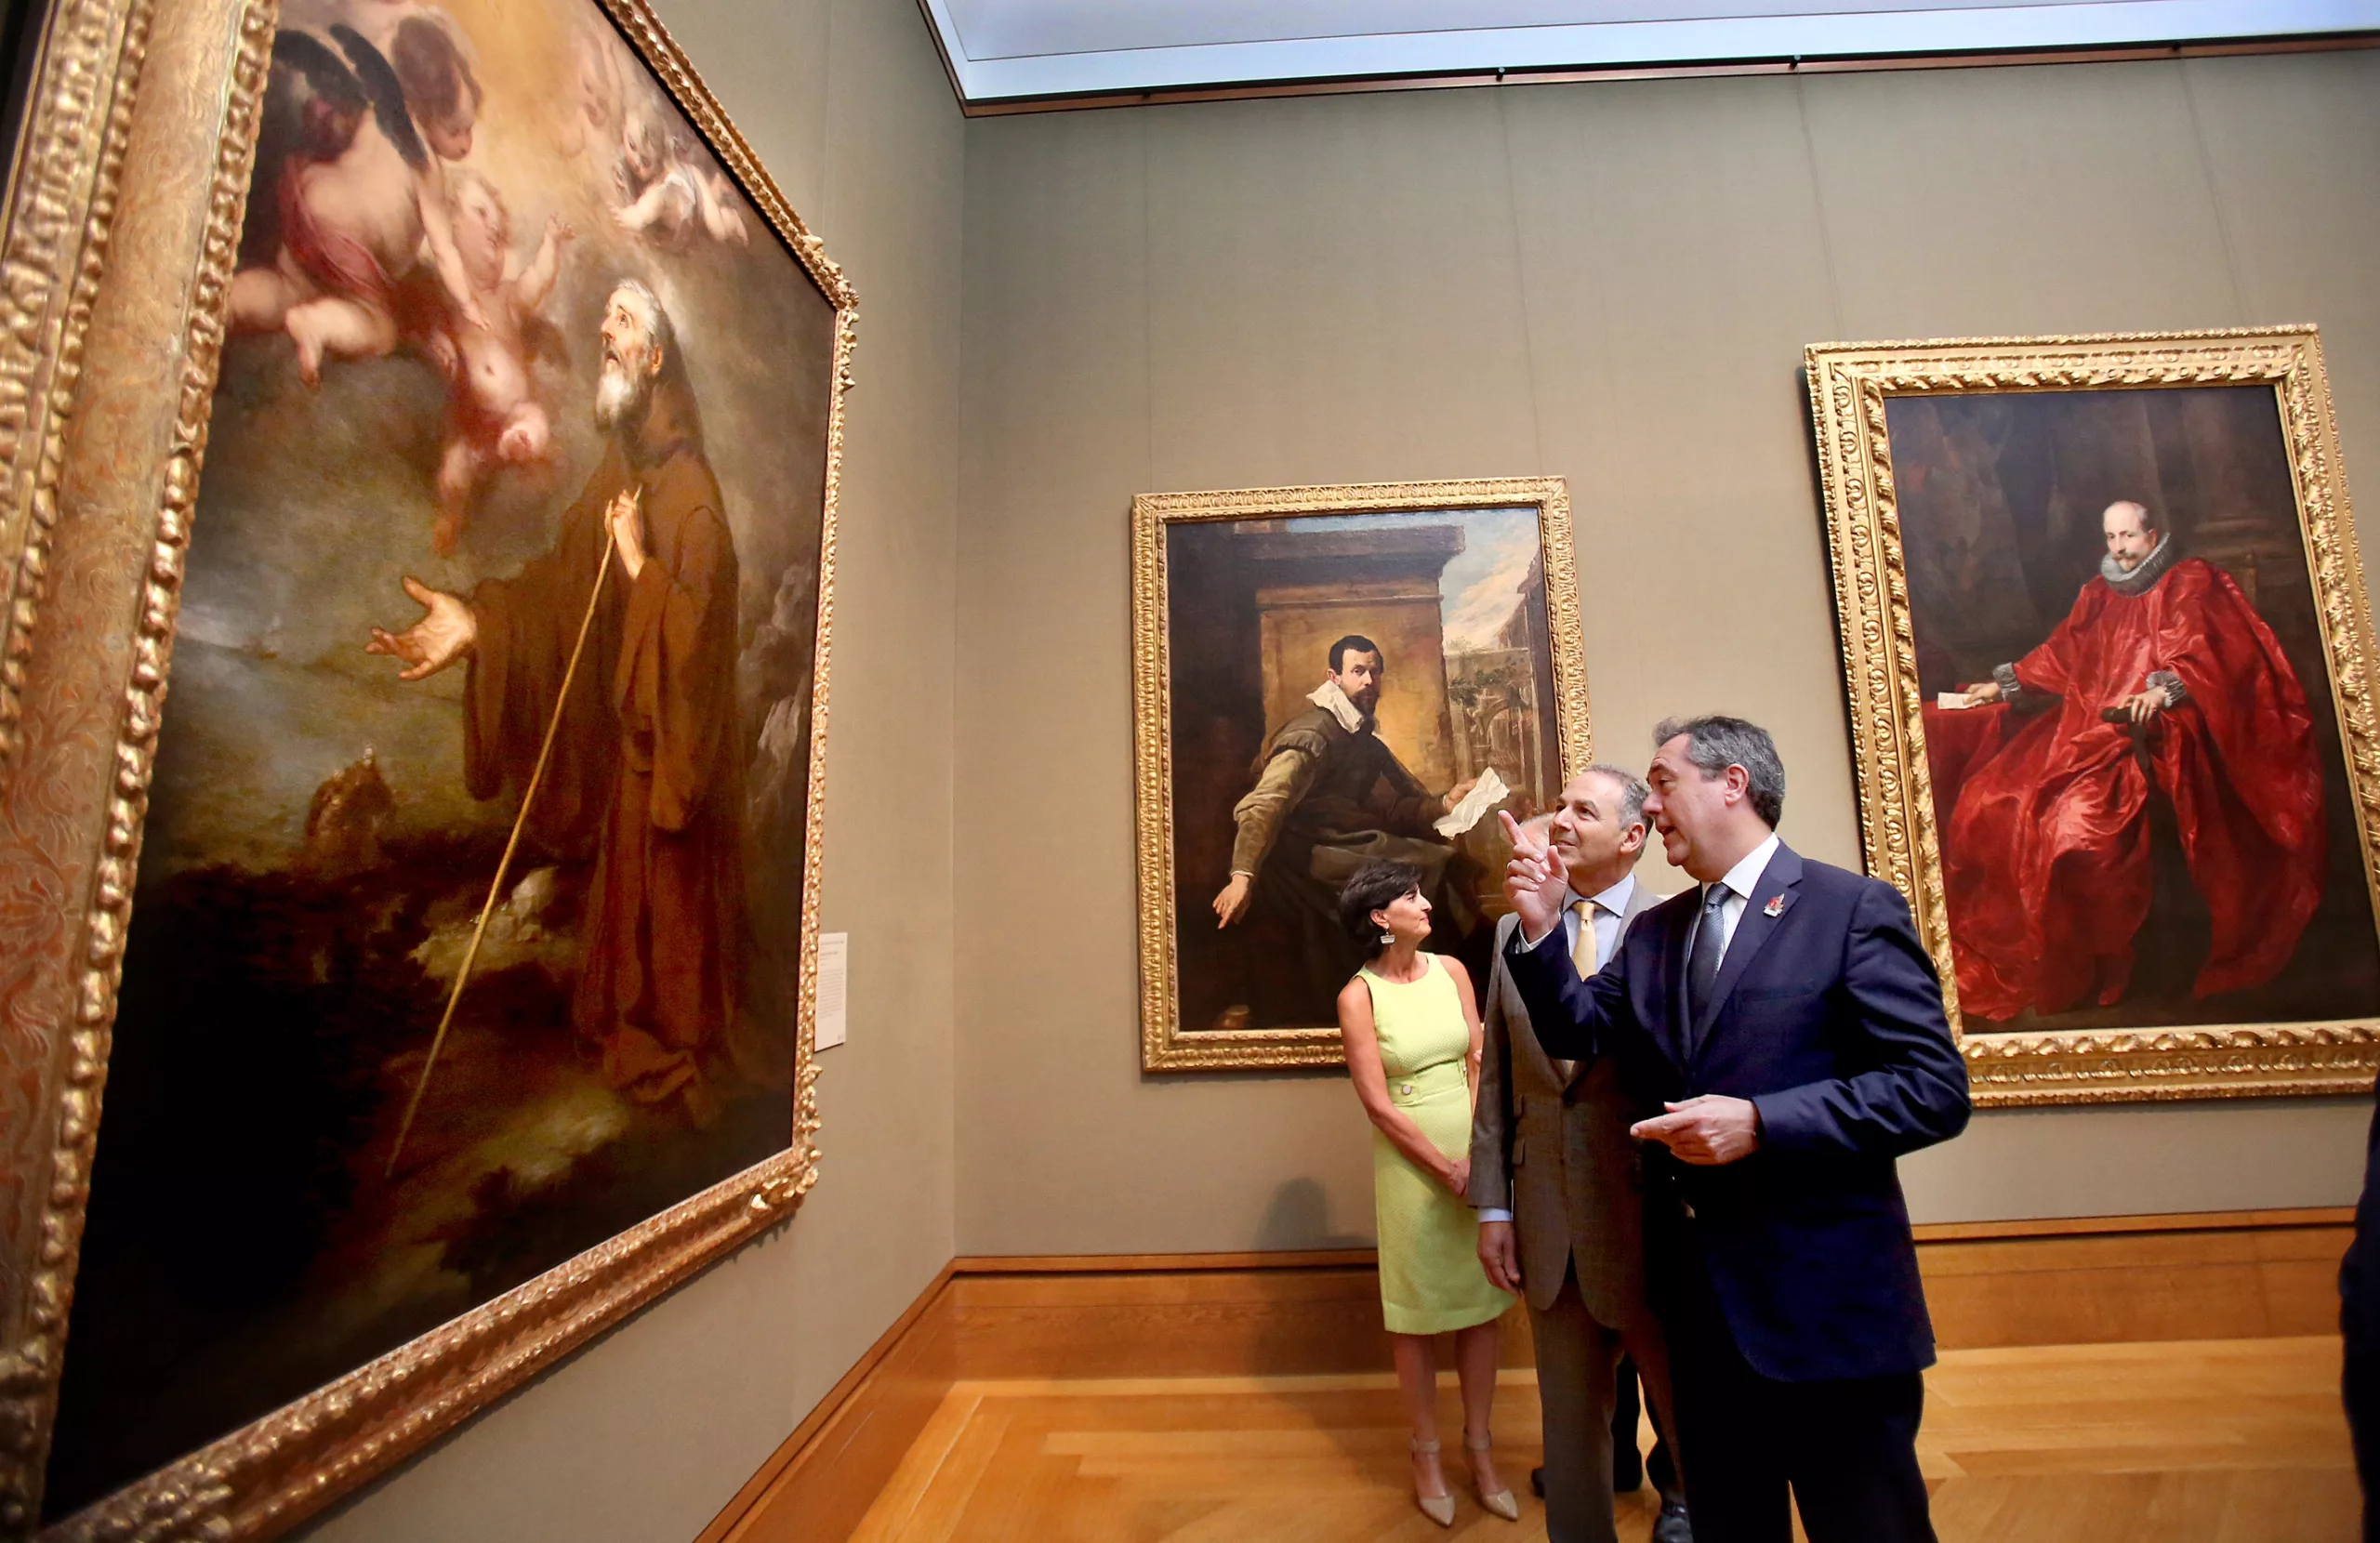 Visitors viewing classic paintings in an art gallery setting.